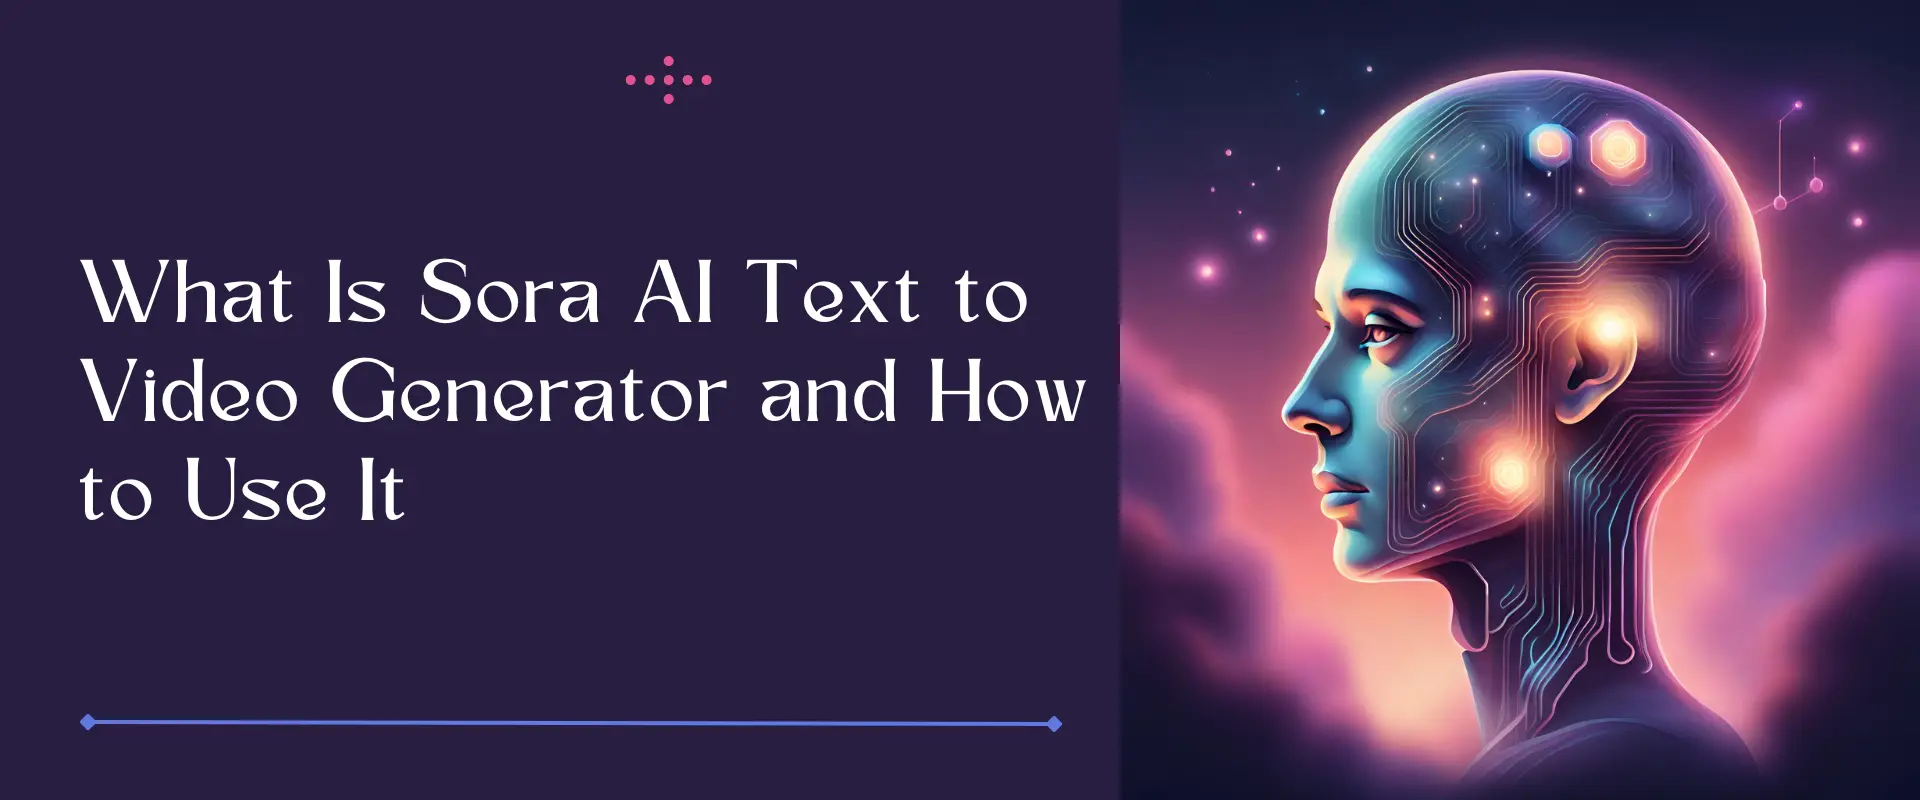 What Is Sora AI Text to Video Generator and How to Use It